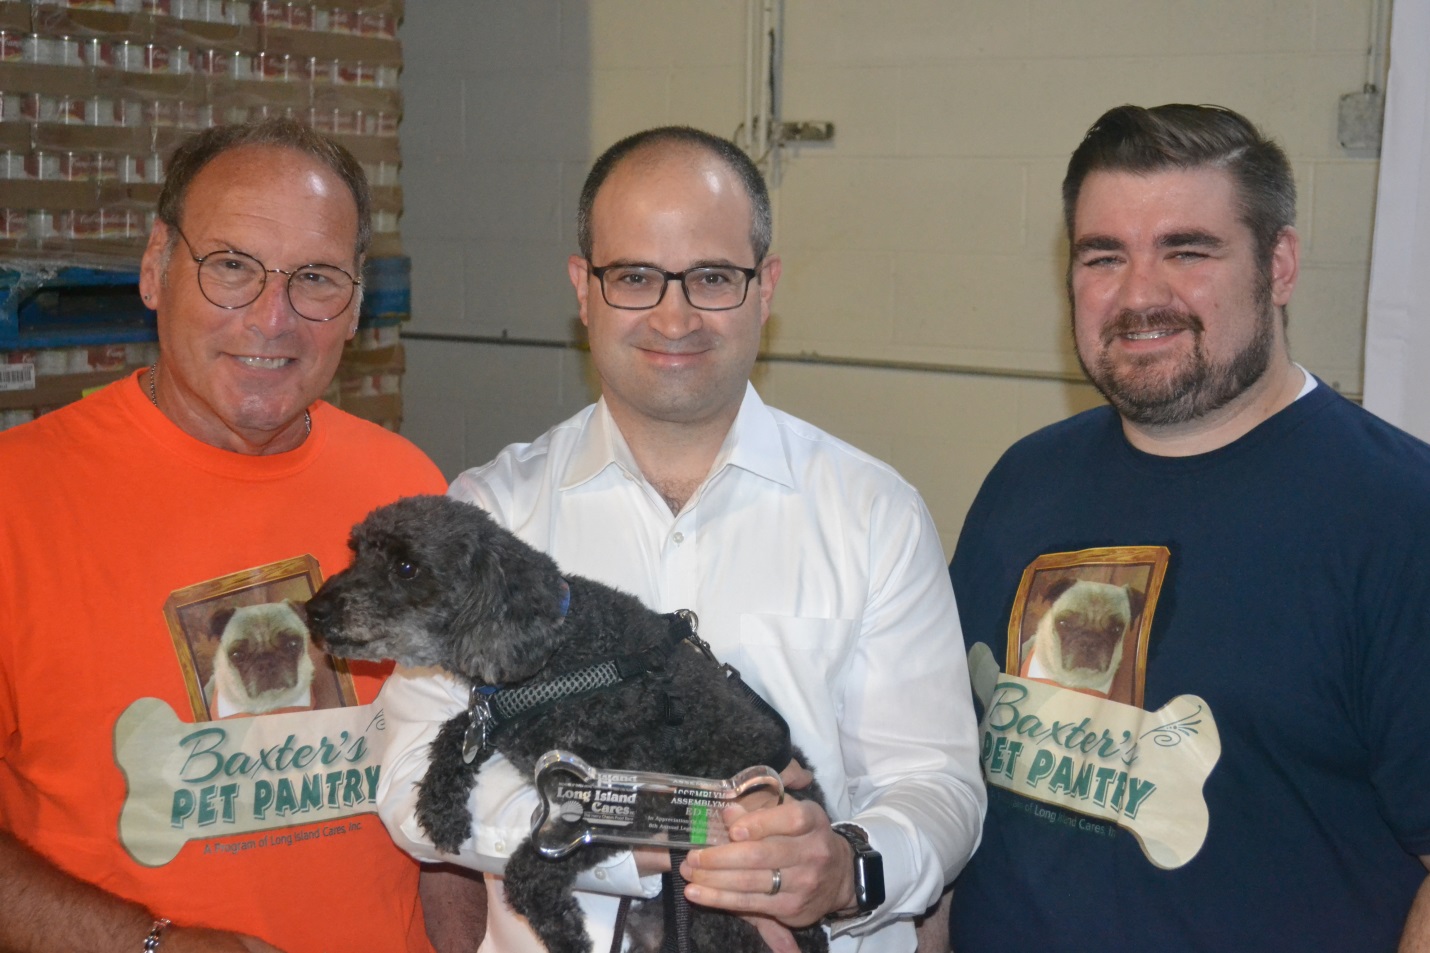 Assemblyman Ra (center) and his rescue dog, Carter, accept an award from Long Island Cares CEO, Paule T. Pachter (left) and Community Events and Food Drive Manager, Billy Gonyou (right) for their part